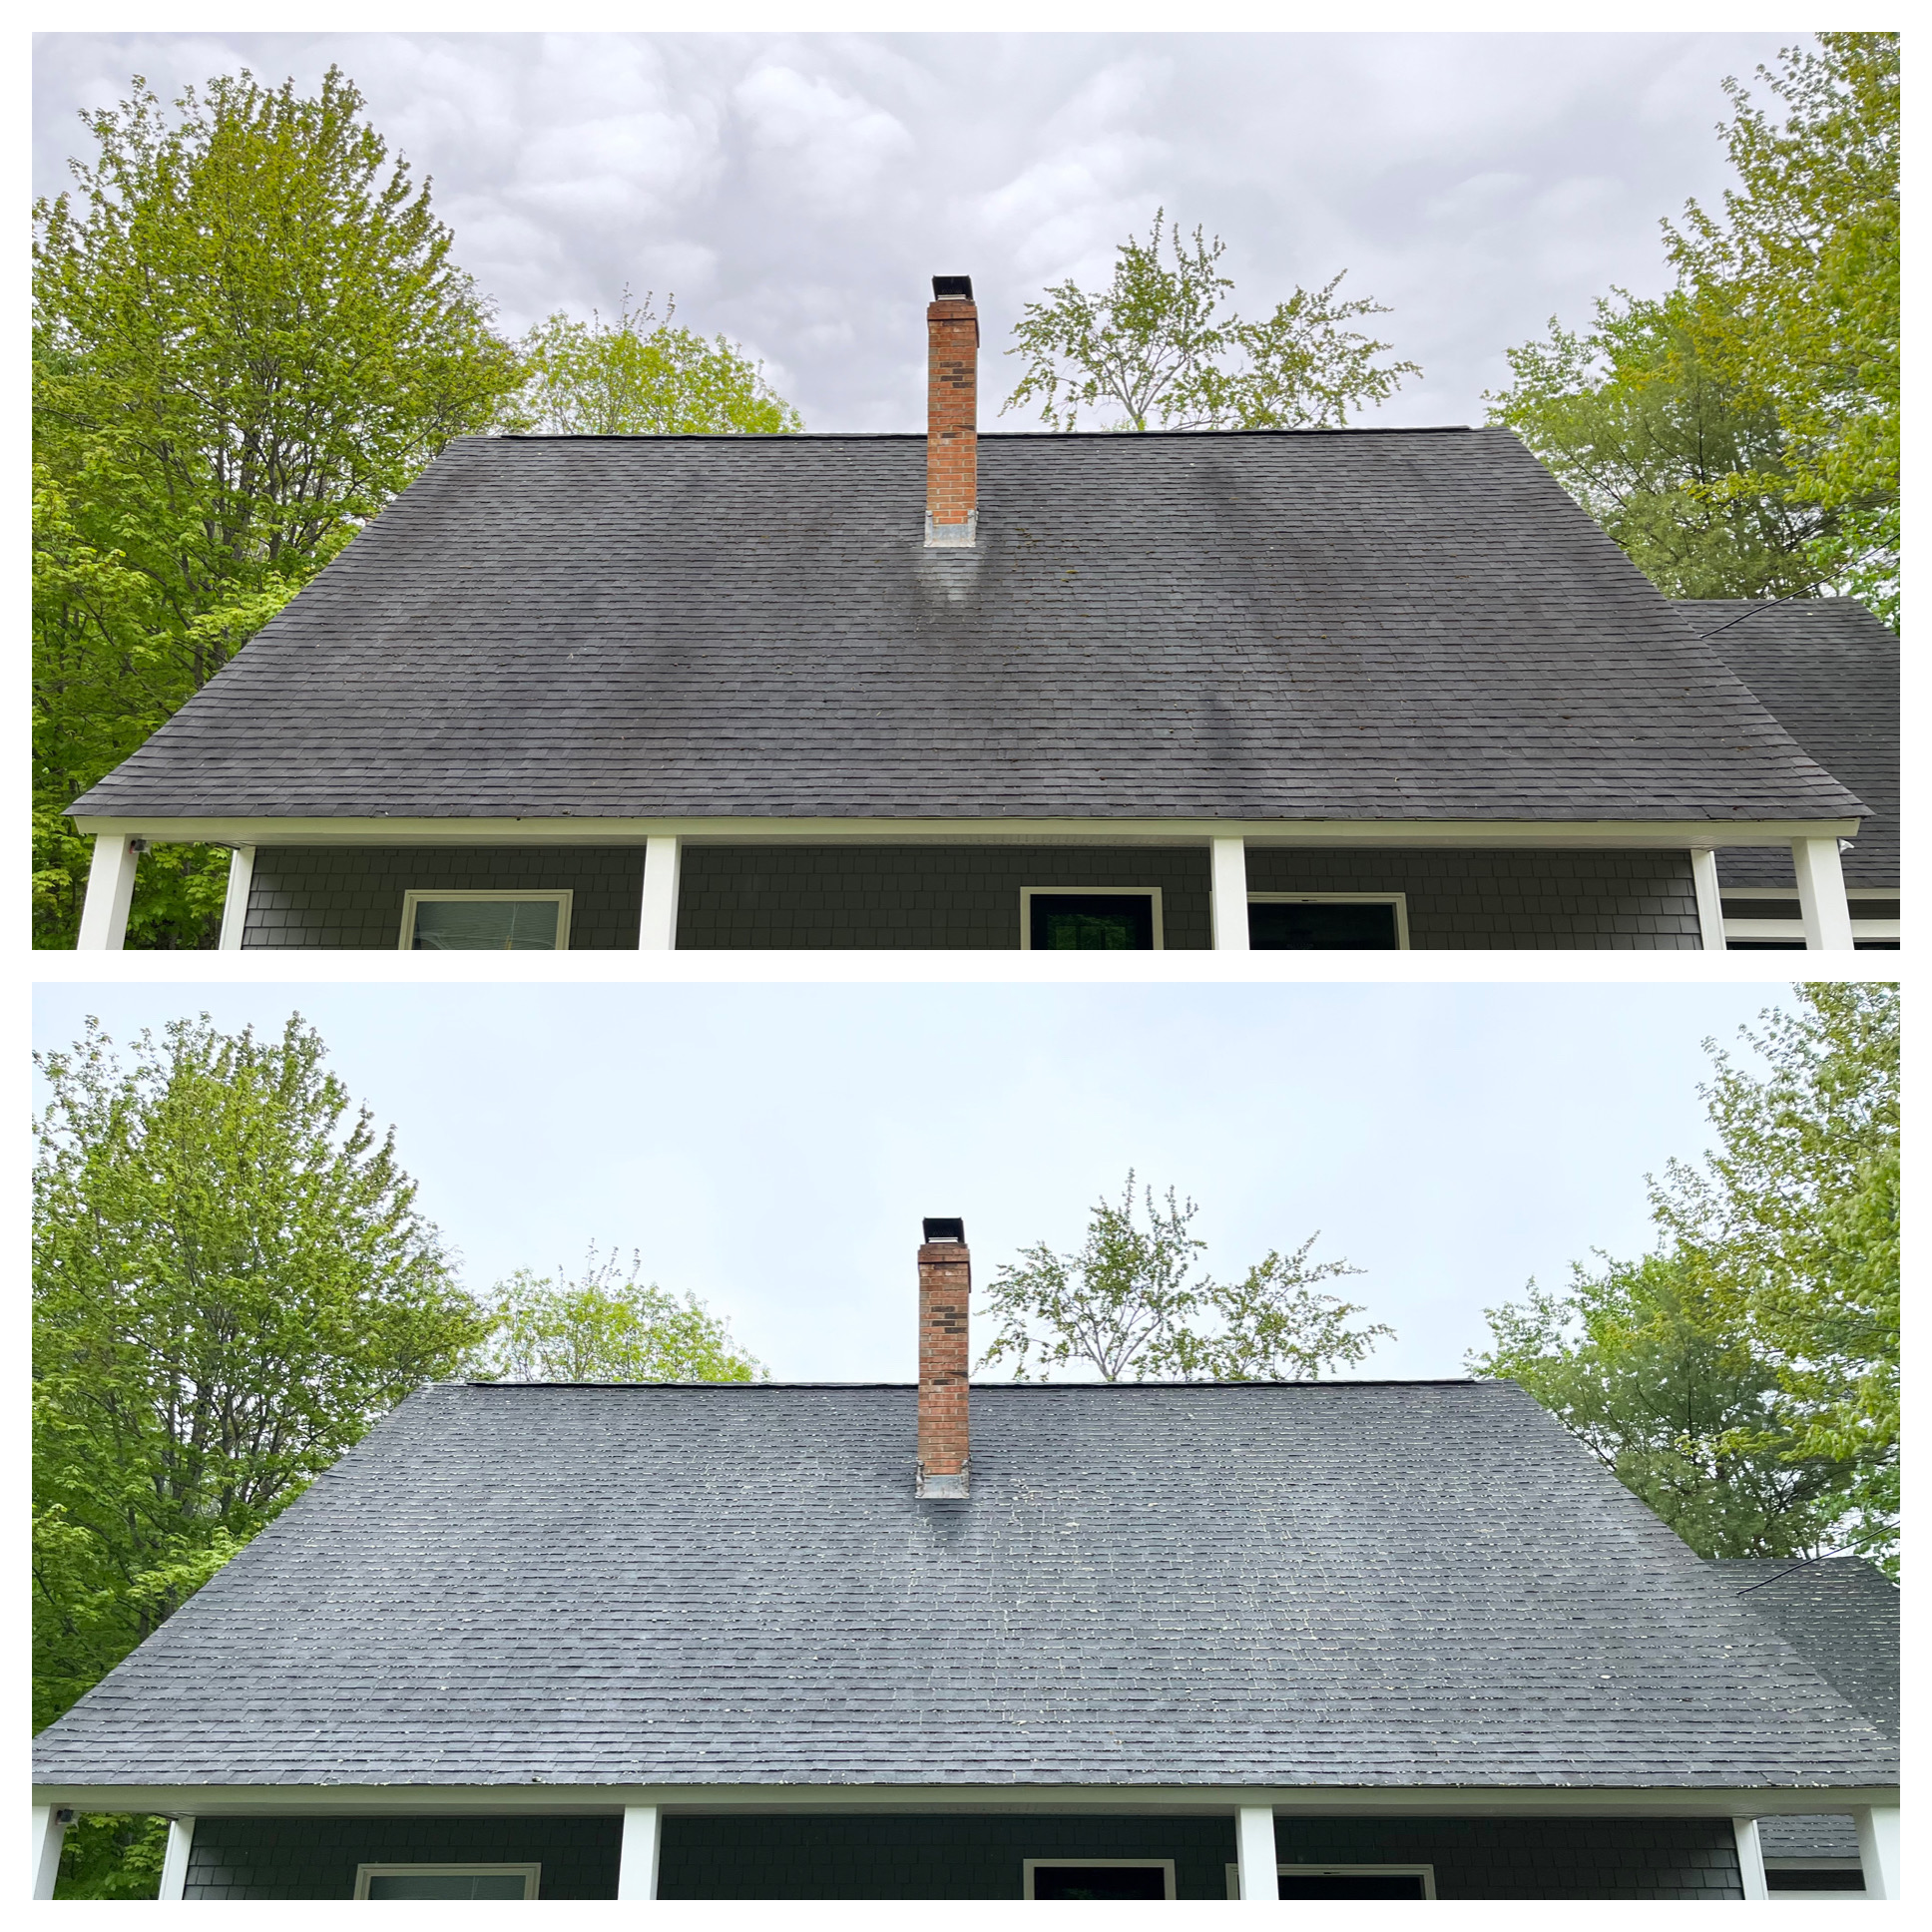 Wolfeboros Premier Roof Cleaning Service: Moss-Free Solutions for Your Home